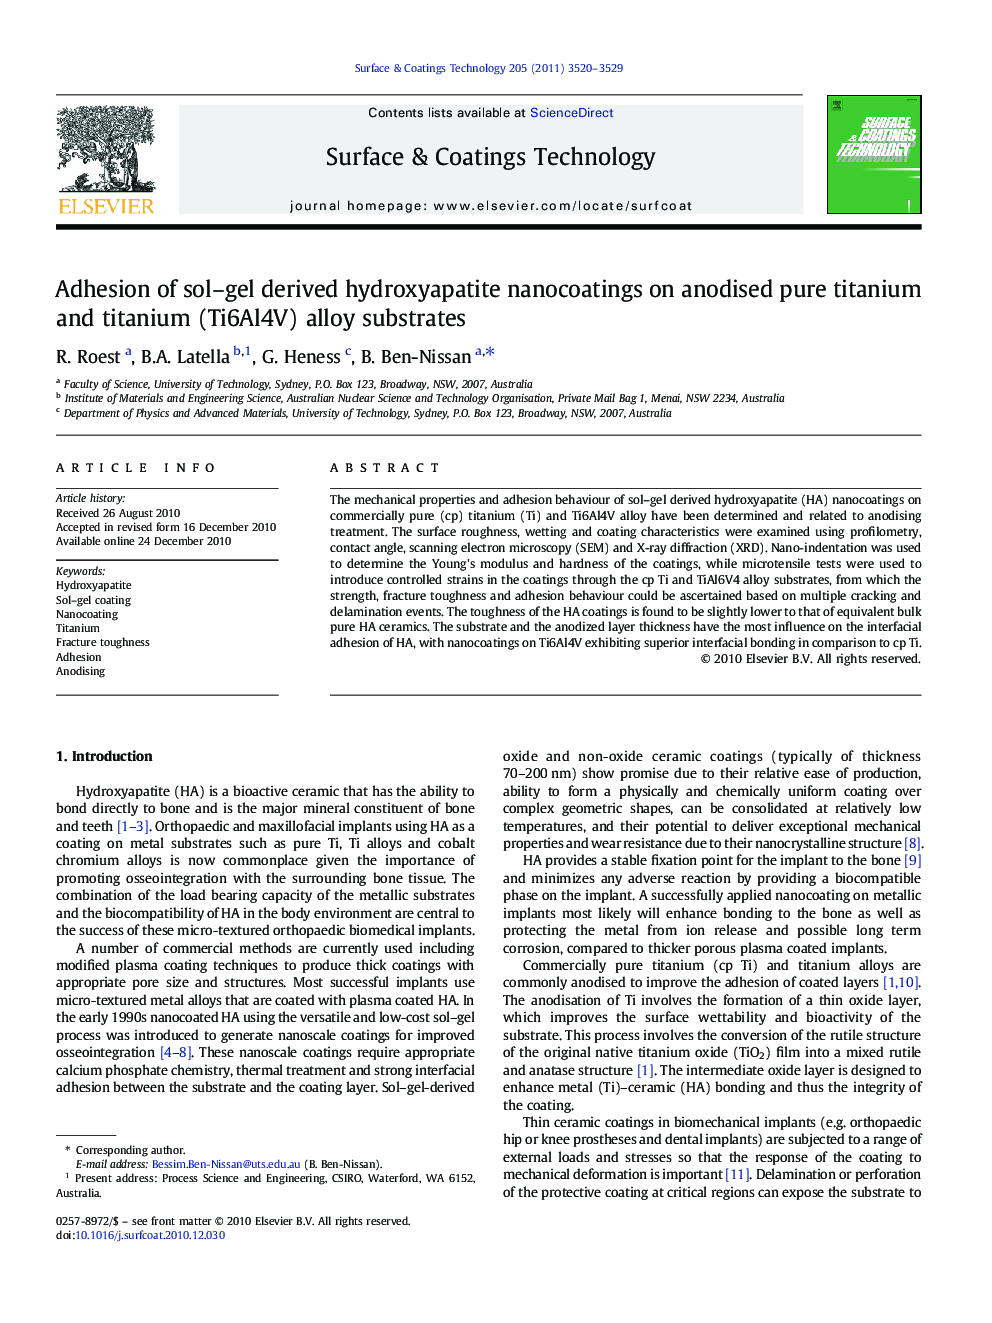 Adhesion of sol-gel derived hydroxyapatite nanocoatings on anodised pure titanium and titanium (Ti6Al4V) alloy substrates